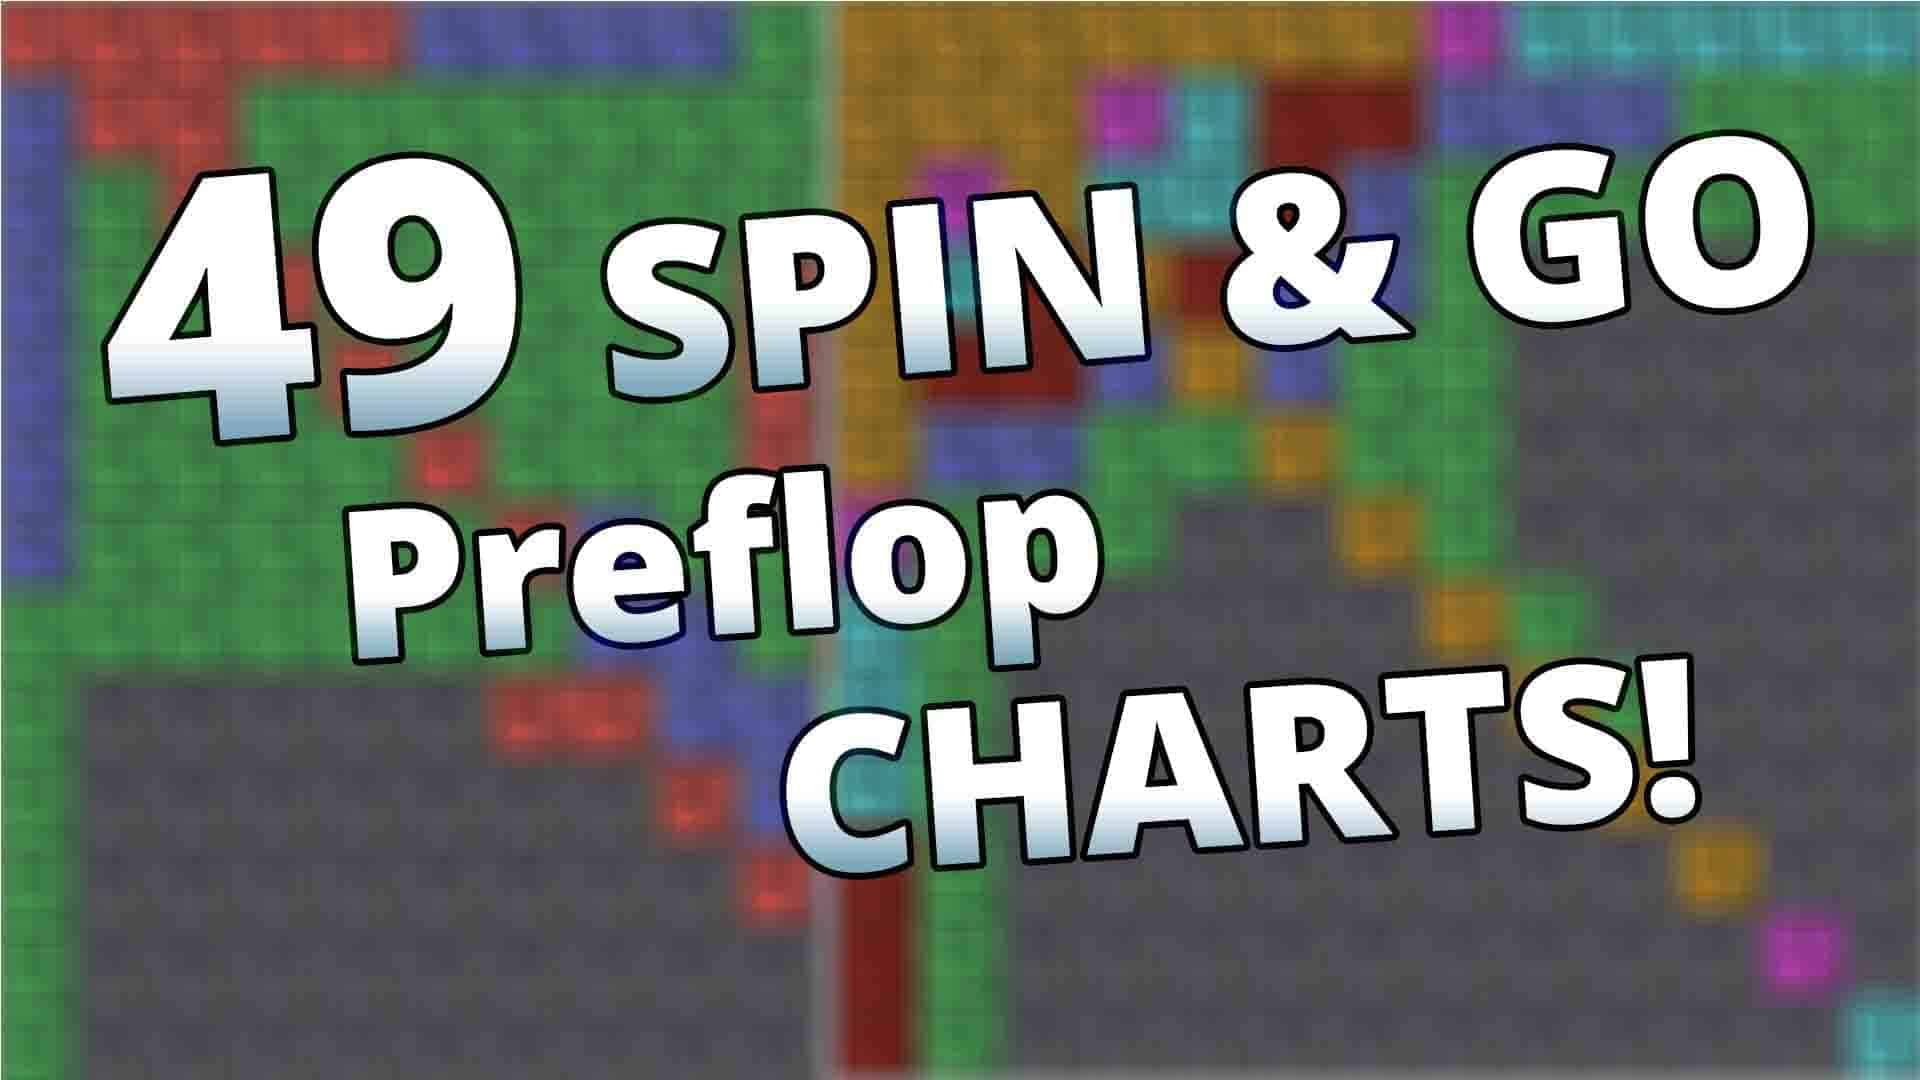 Spin and go charts preflop